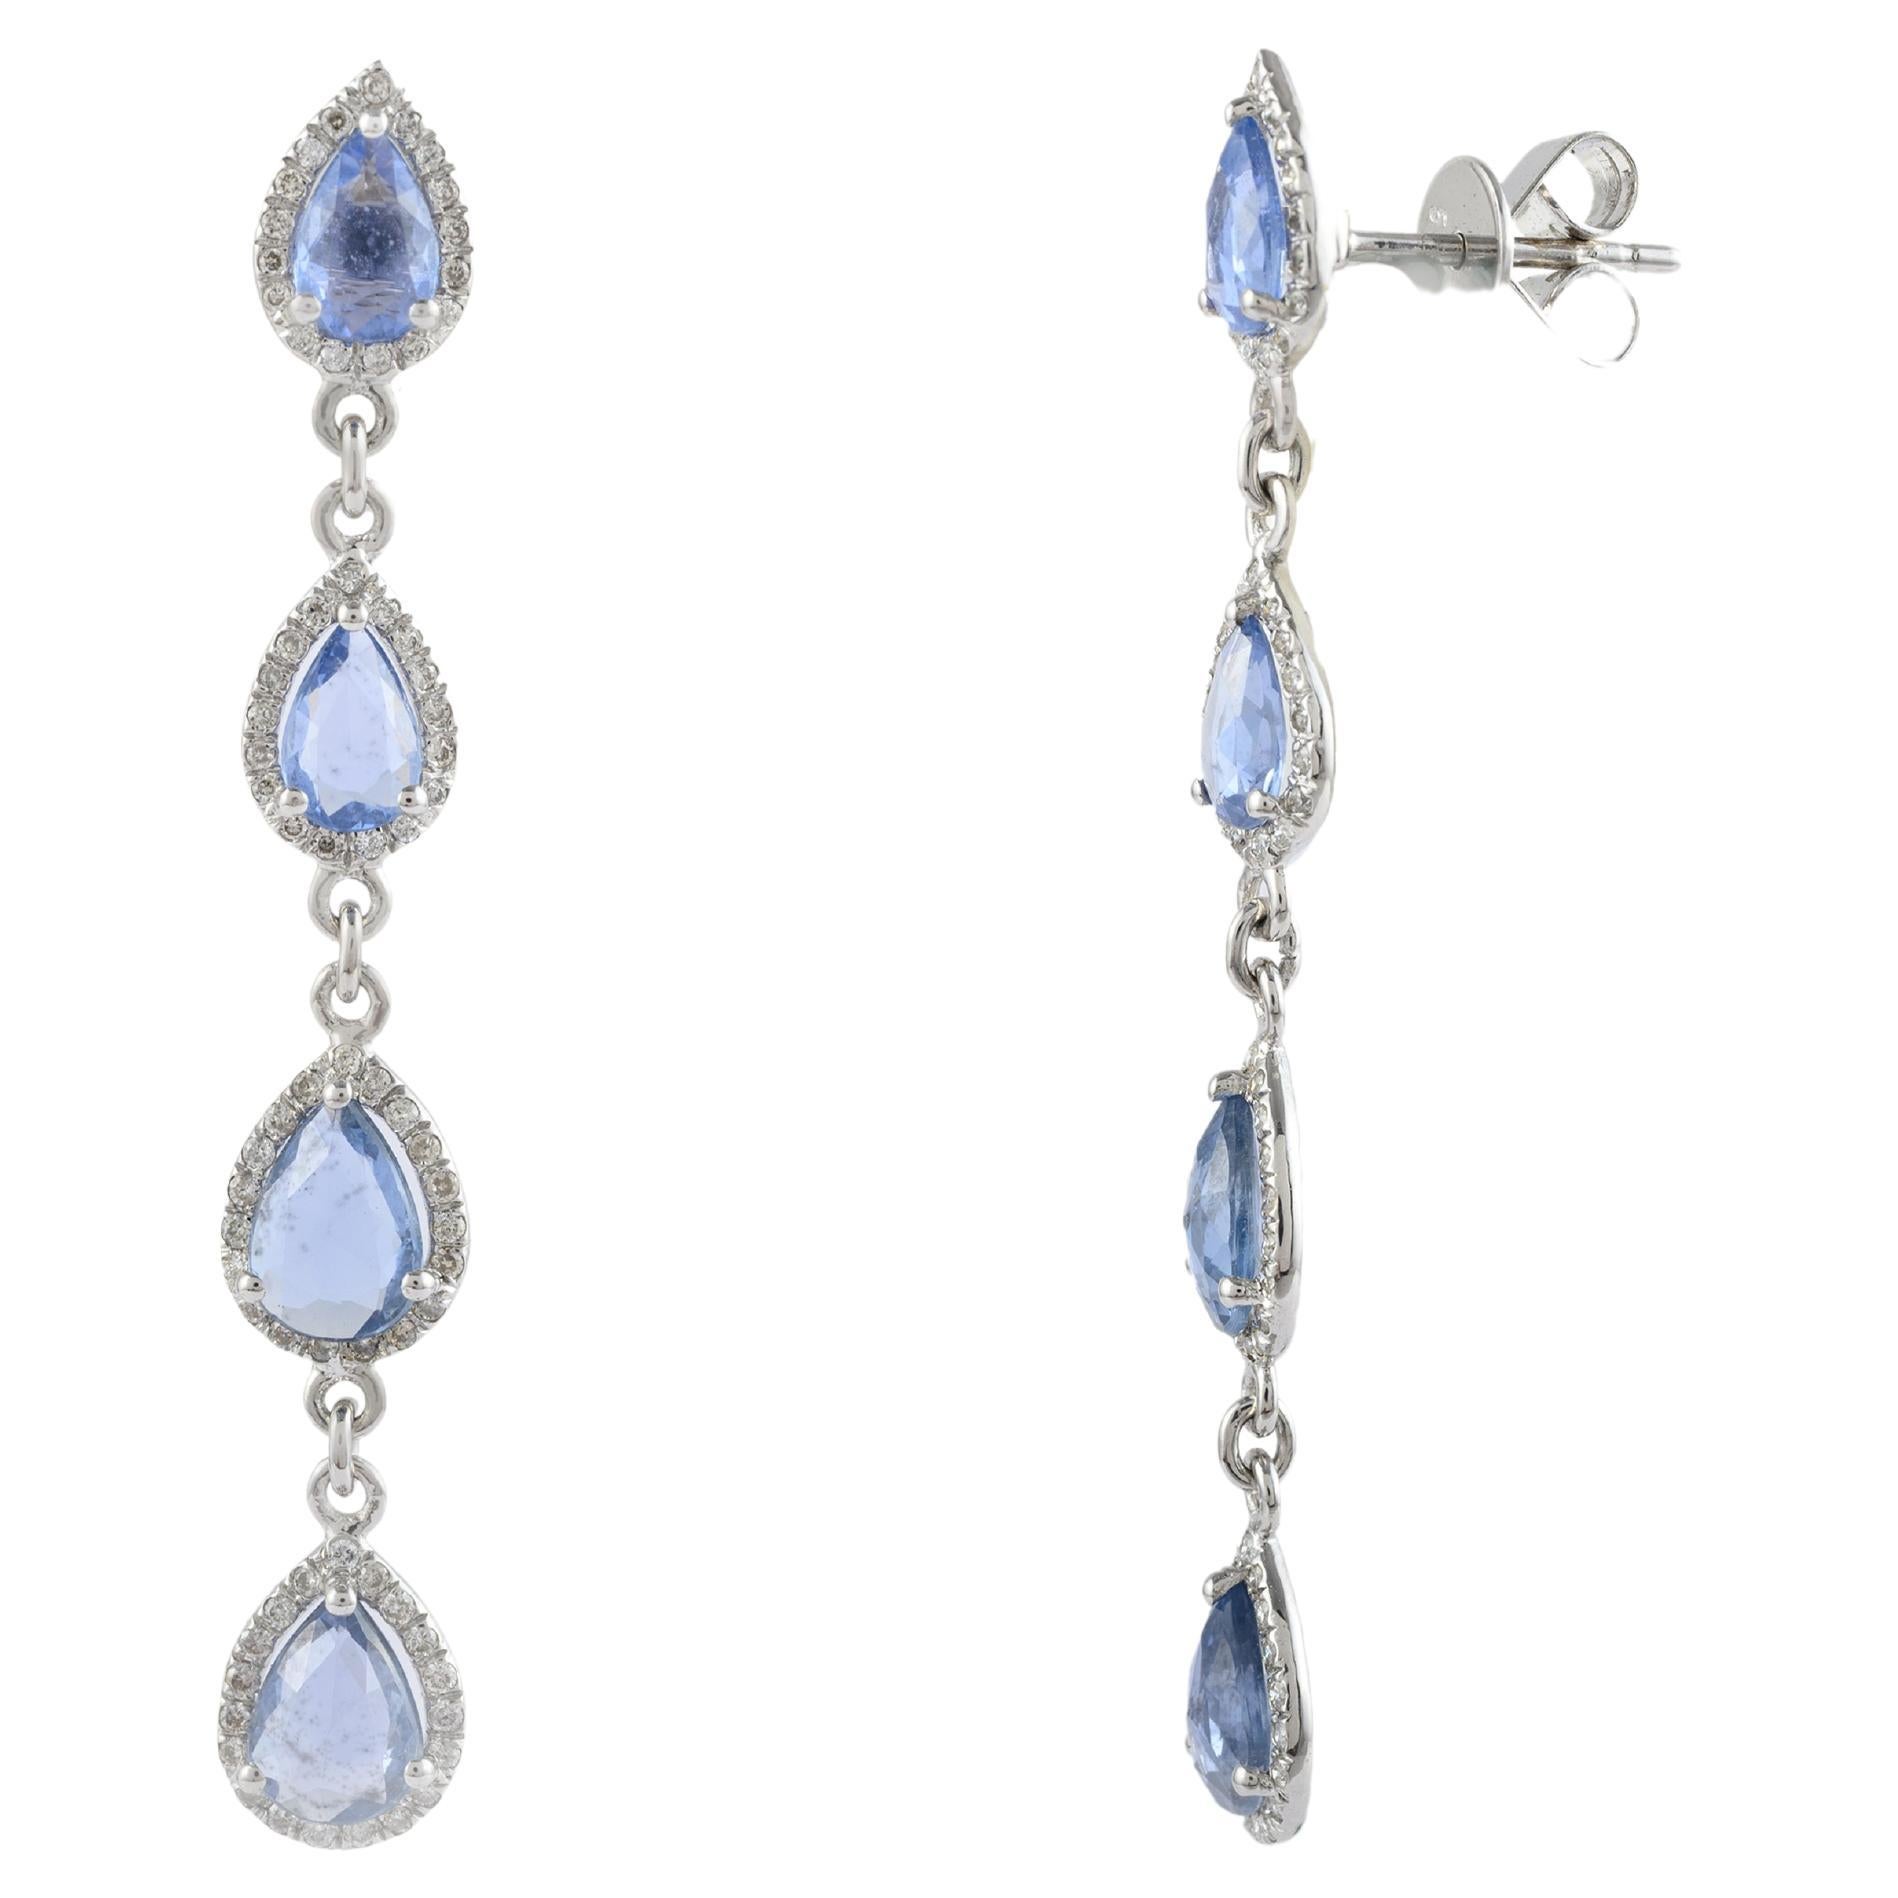 Gorgeous 4.38ct Sapphire Dangle Earrings with Diamonds in 14k Solid White Gold